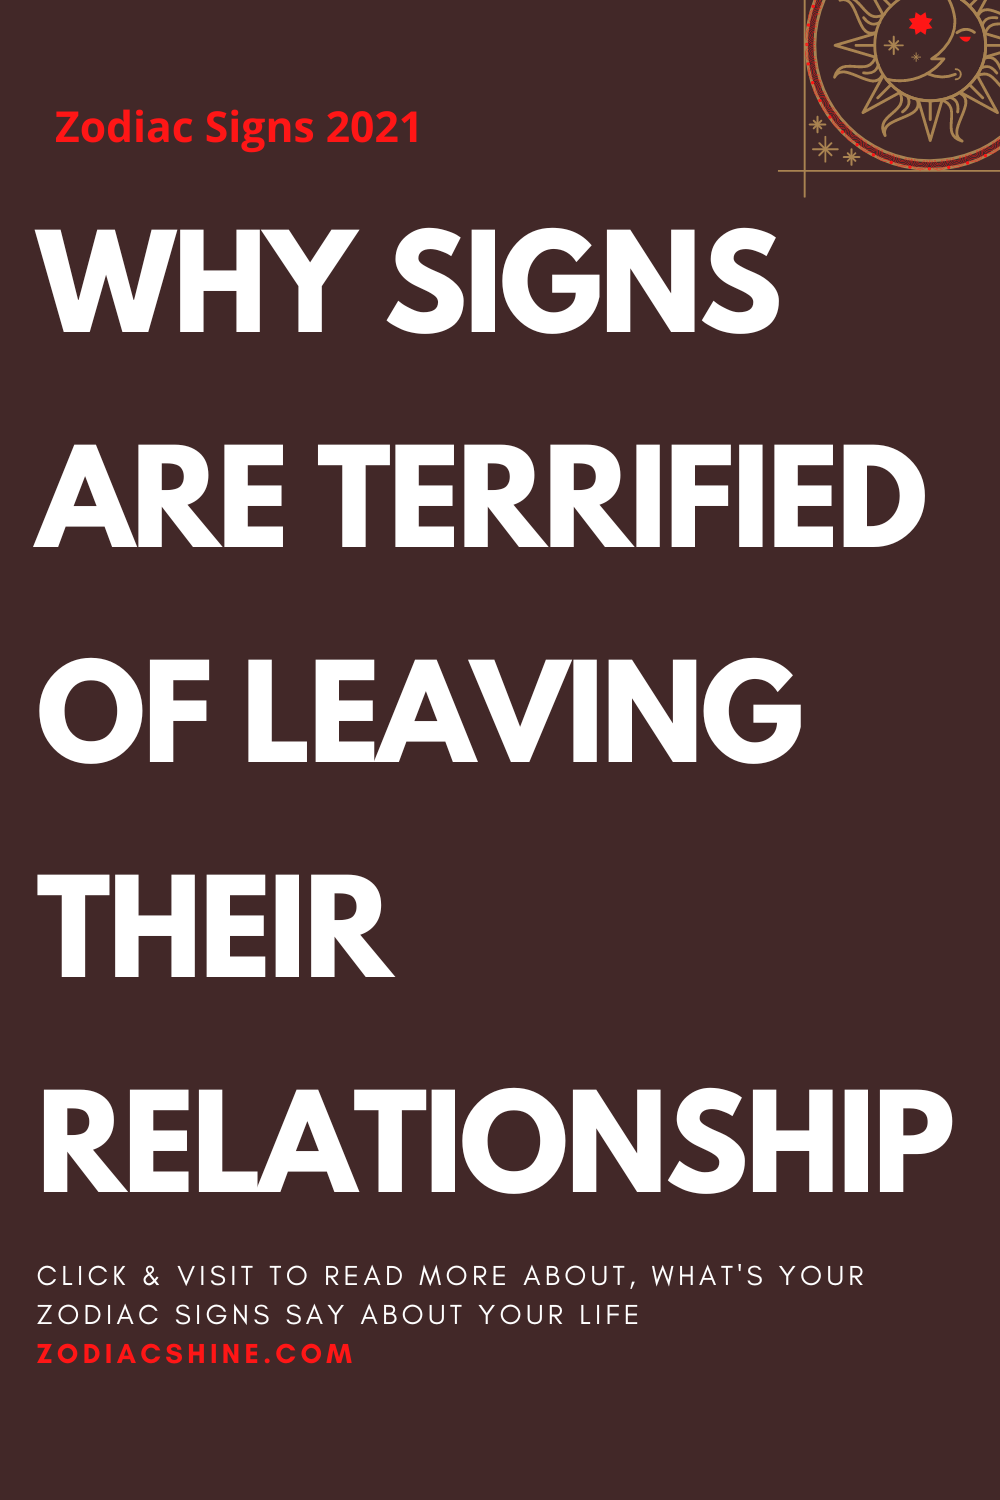 WHY SIGNS ARE TERRIFIED OF LEAVING THEIR RELATIONSHIP